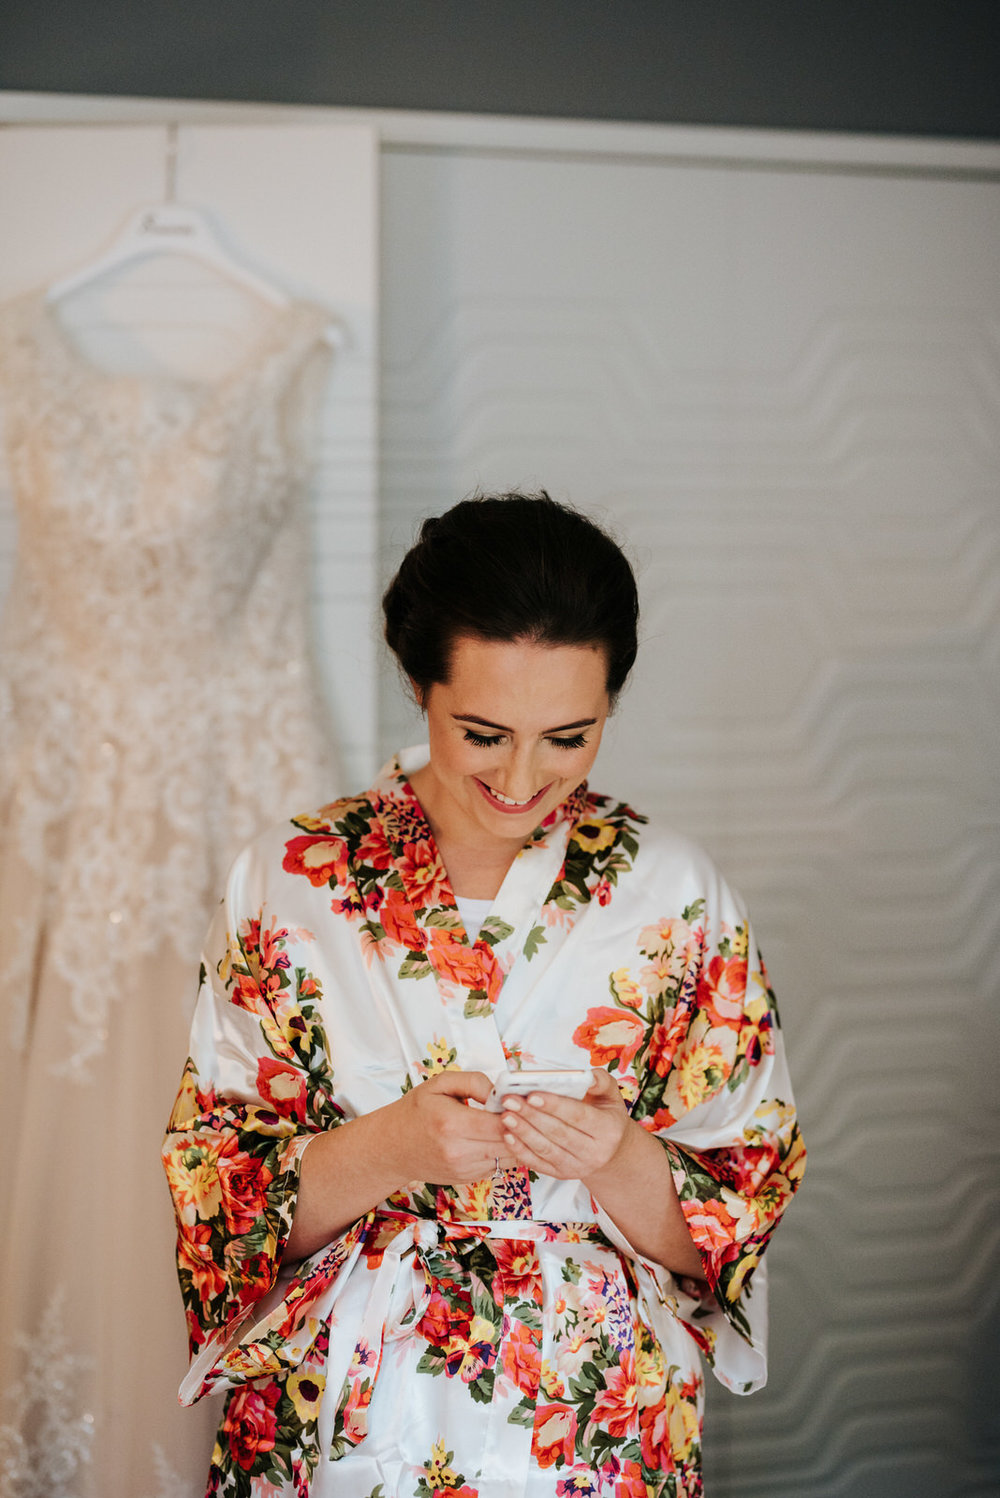 Bride looks and smiles at phone as she reads a text message